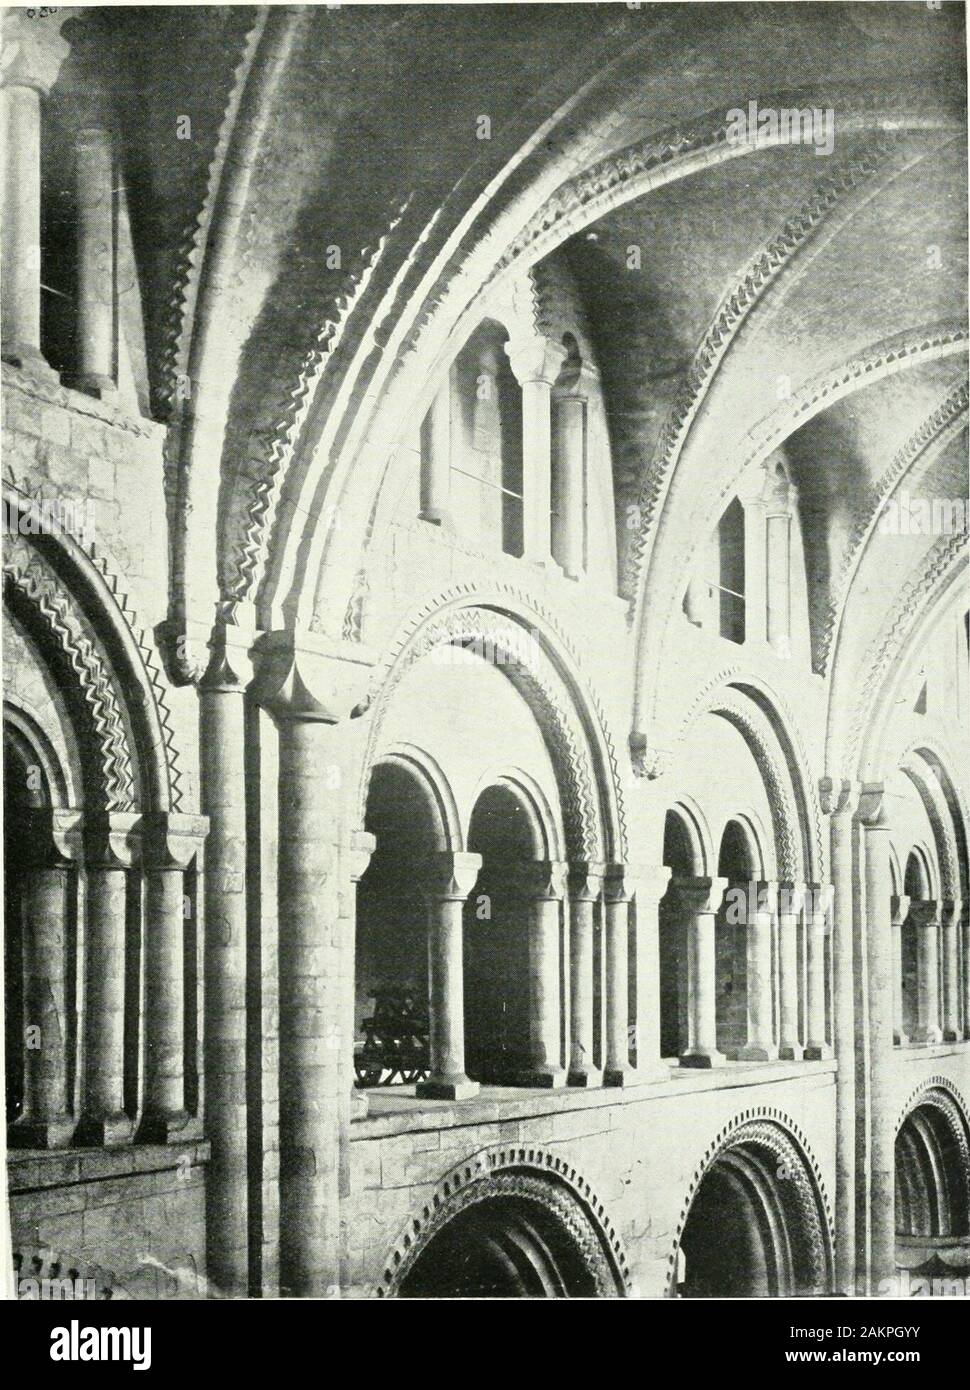 Byzantine and Romanesque architecture . re is a heavy transverse archdividing one double bay from another and betweenthem are two quadripartite vaults with no transverse ribto divide them. The same plan obtains in the transept(Fig. 131). I am not aware of another instance of thisarrangement. The great transverse arches are pointed, but they aresegmental : the height being given by the side walls andthe round arch of the central tower, a pointed arch couldonly be got by dropping the springing. This againimplies that the present vault was not the coveringoriginally contemplated. Canon Greenwell, Stock Photo